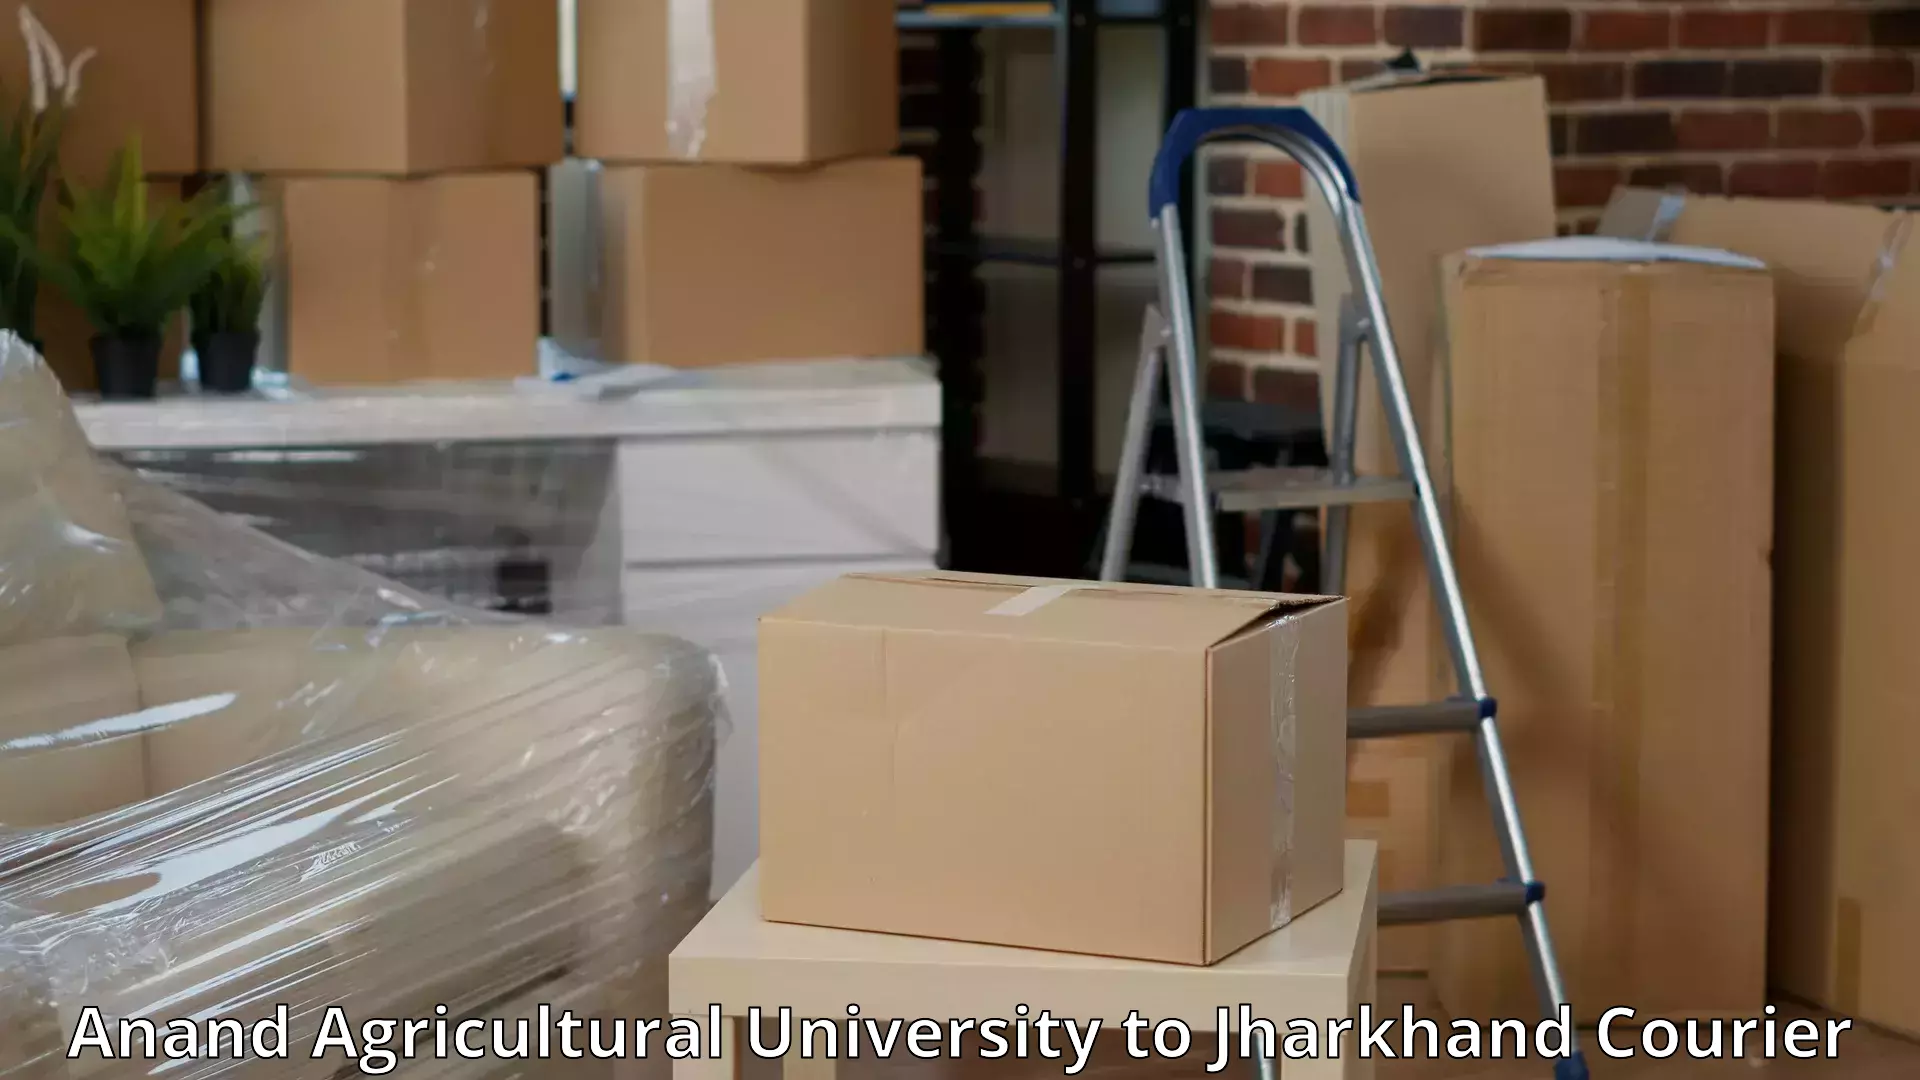 Efficient relocation services Anand Agricultural University to Jharkhand